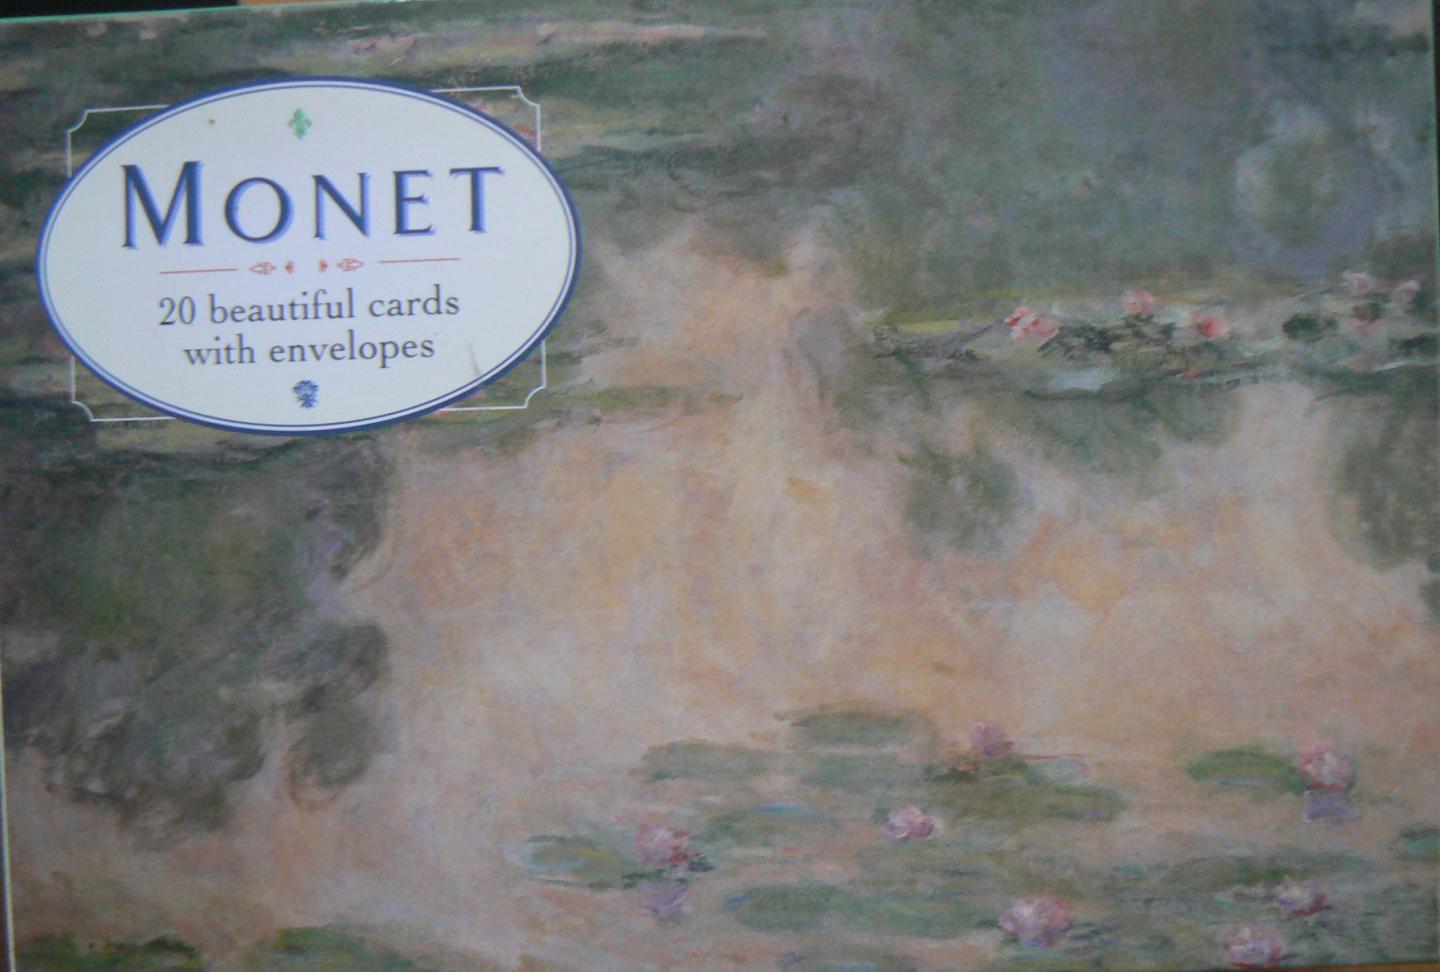  - Monet, 20 beautiful cards with envelopes